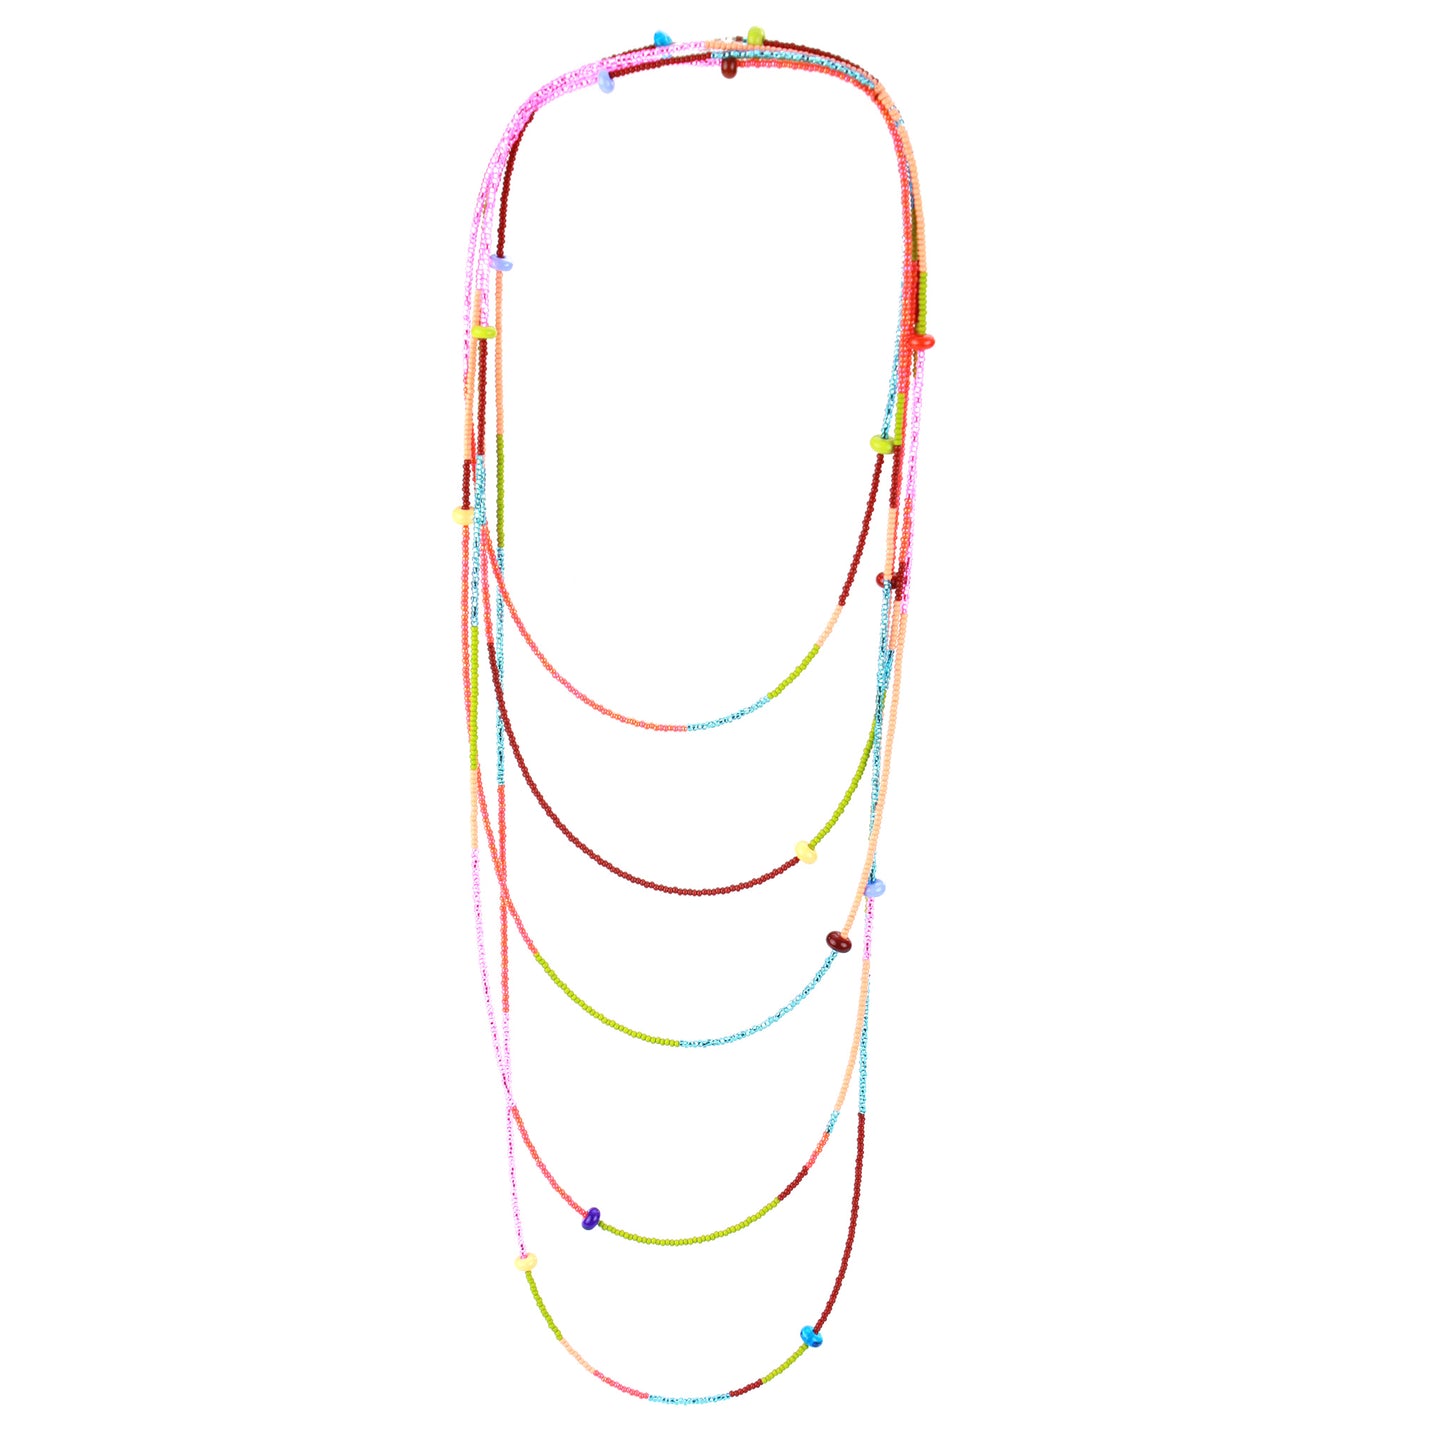 12 foot necklace - Multi colored